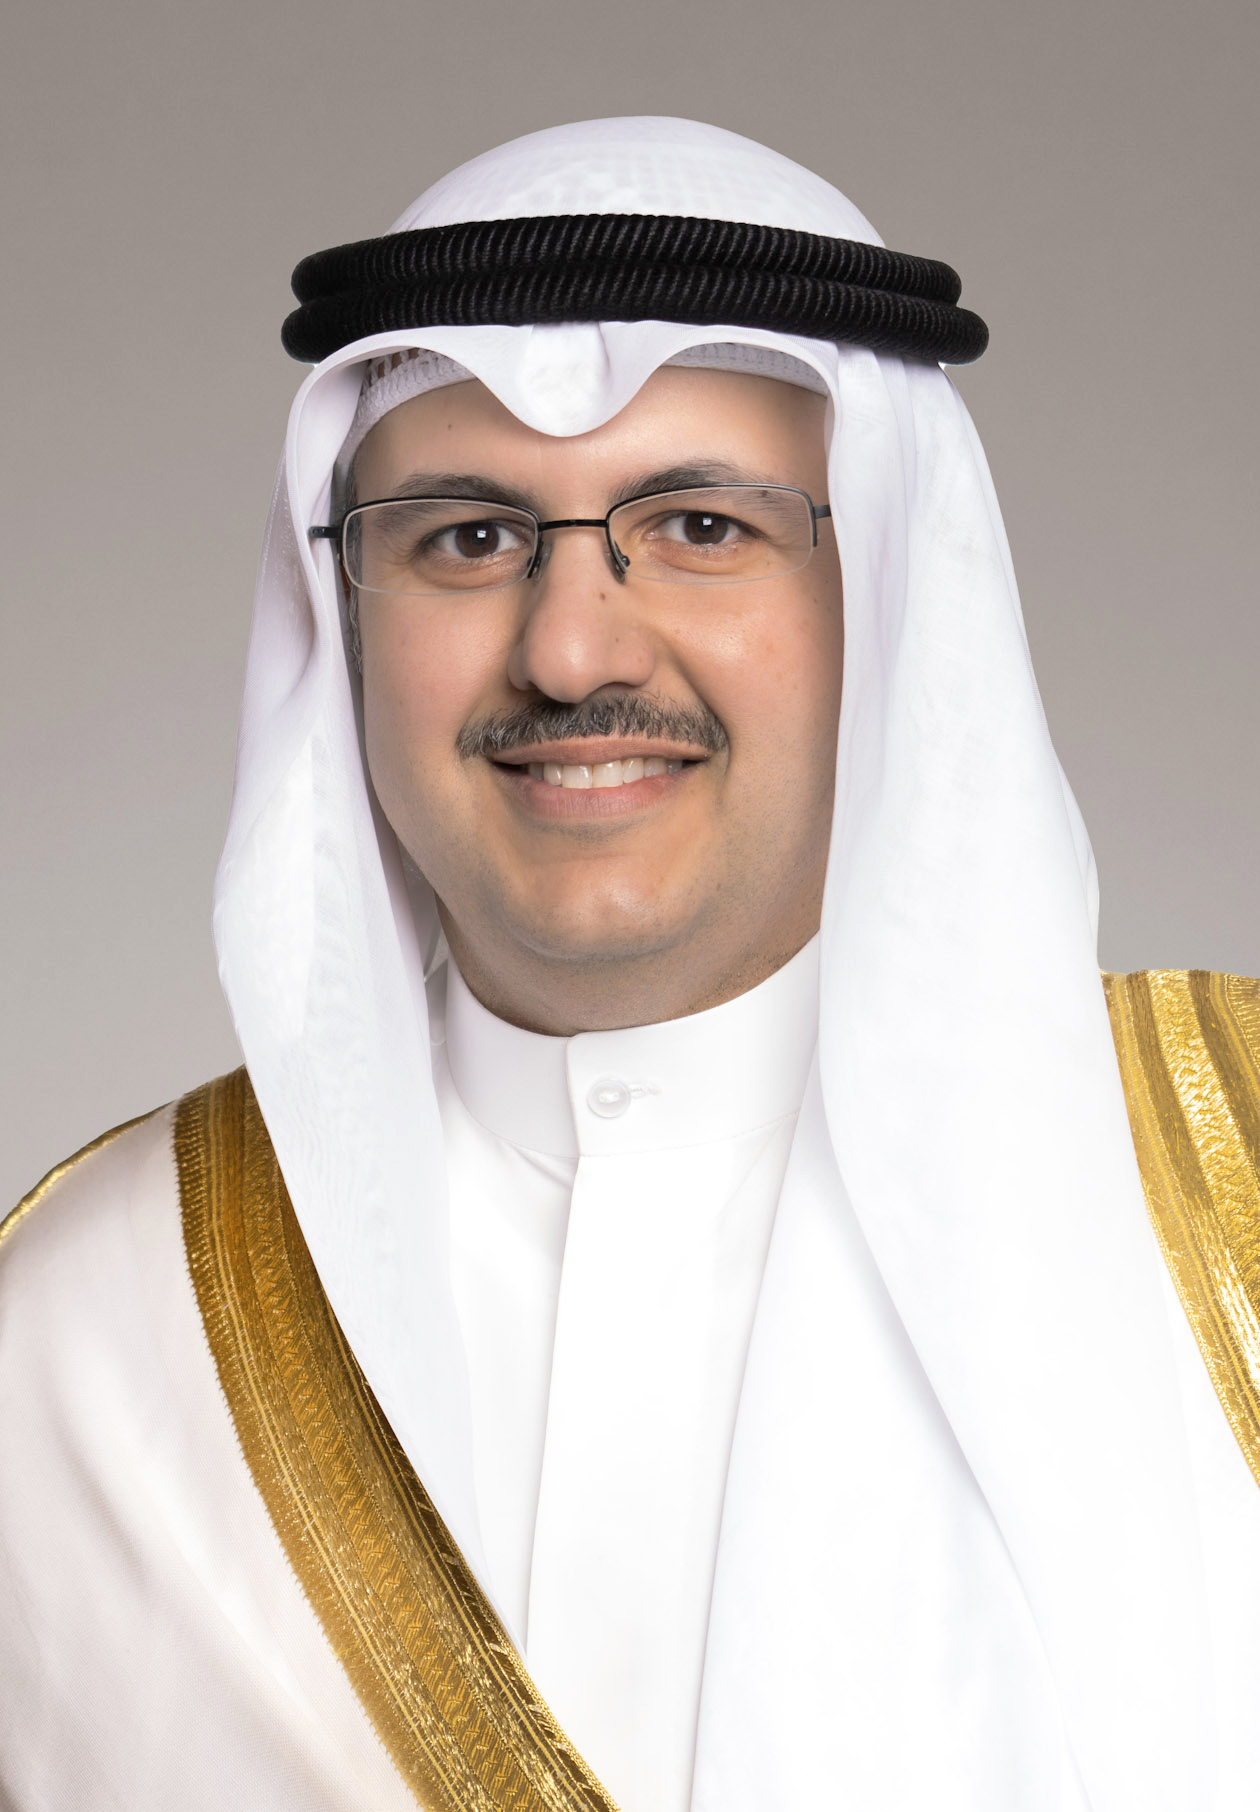 Minister of Social Affairs and Community Development and Minister for Women and Childhood Affairs Sheikh Firas Saud Al-Malik Al-Sabah